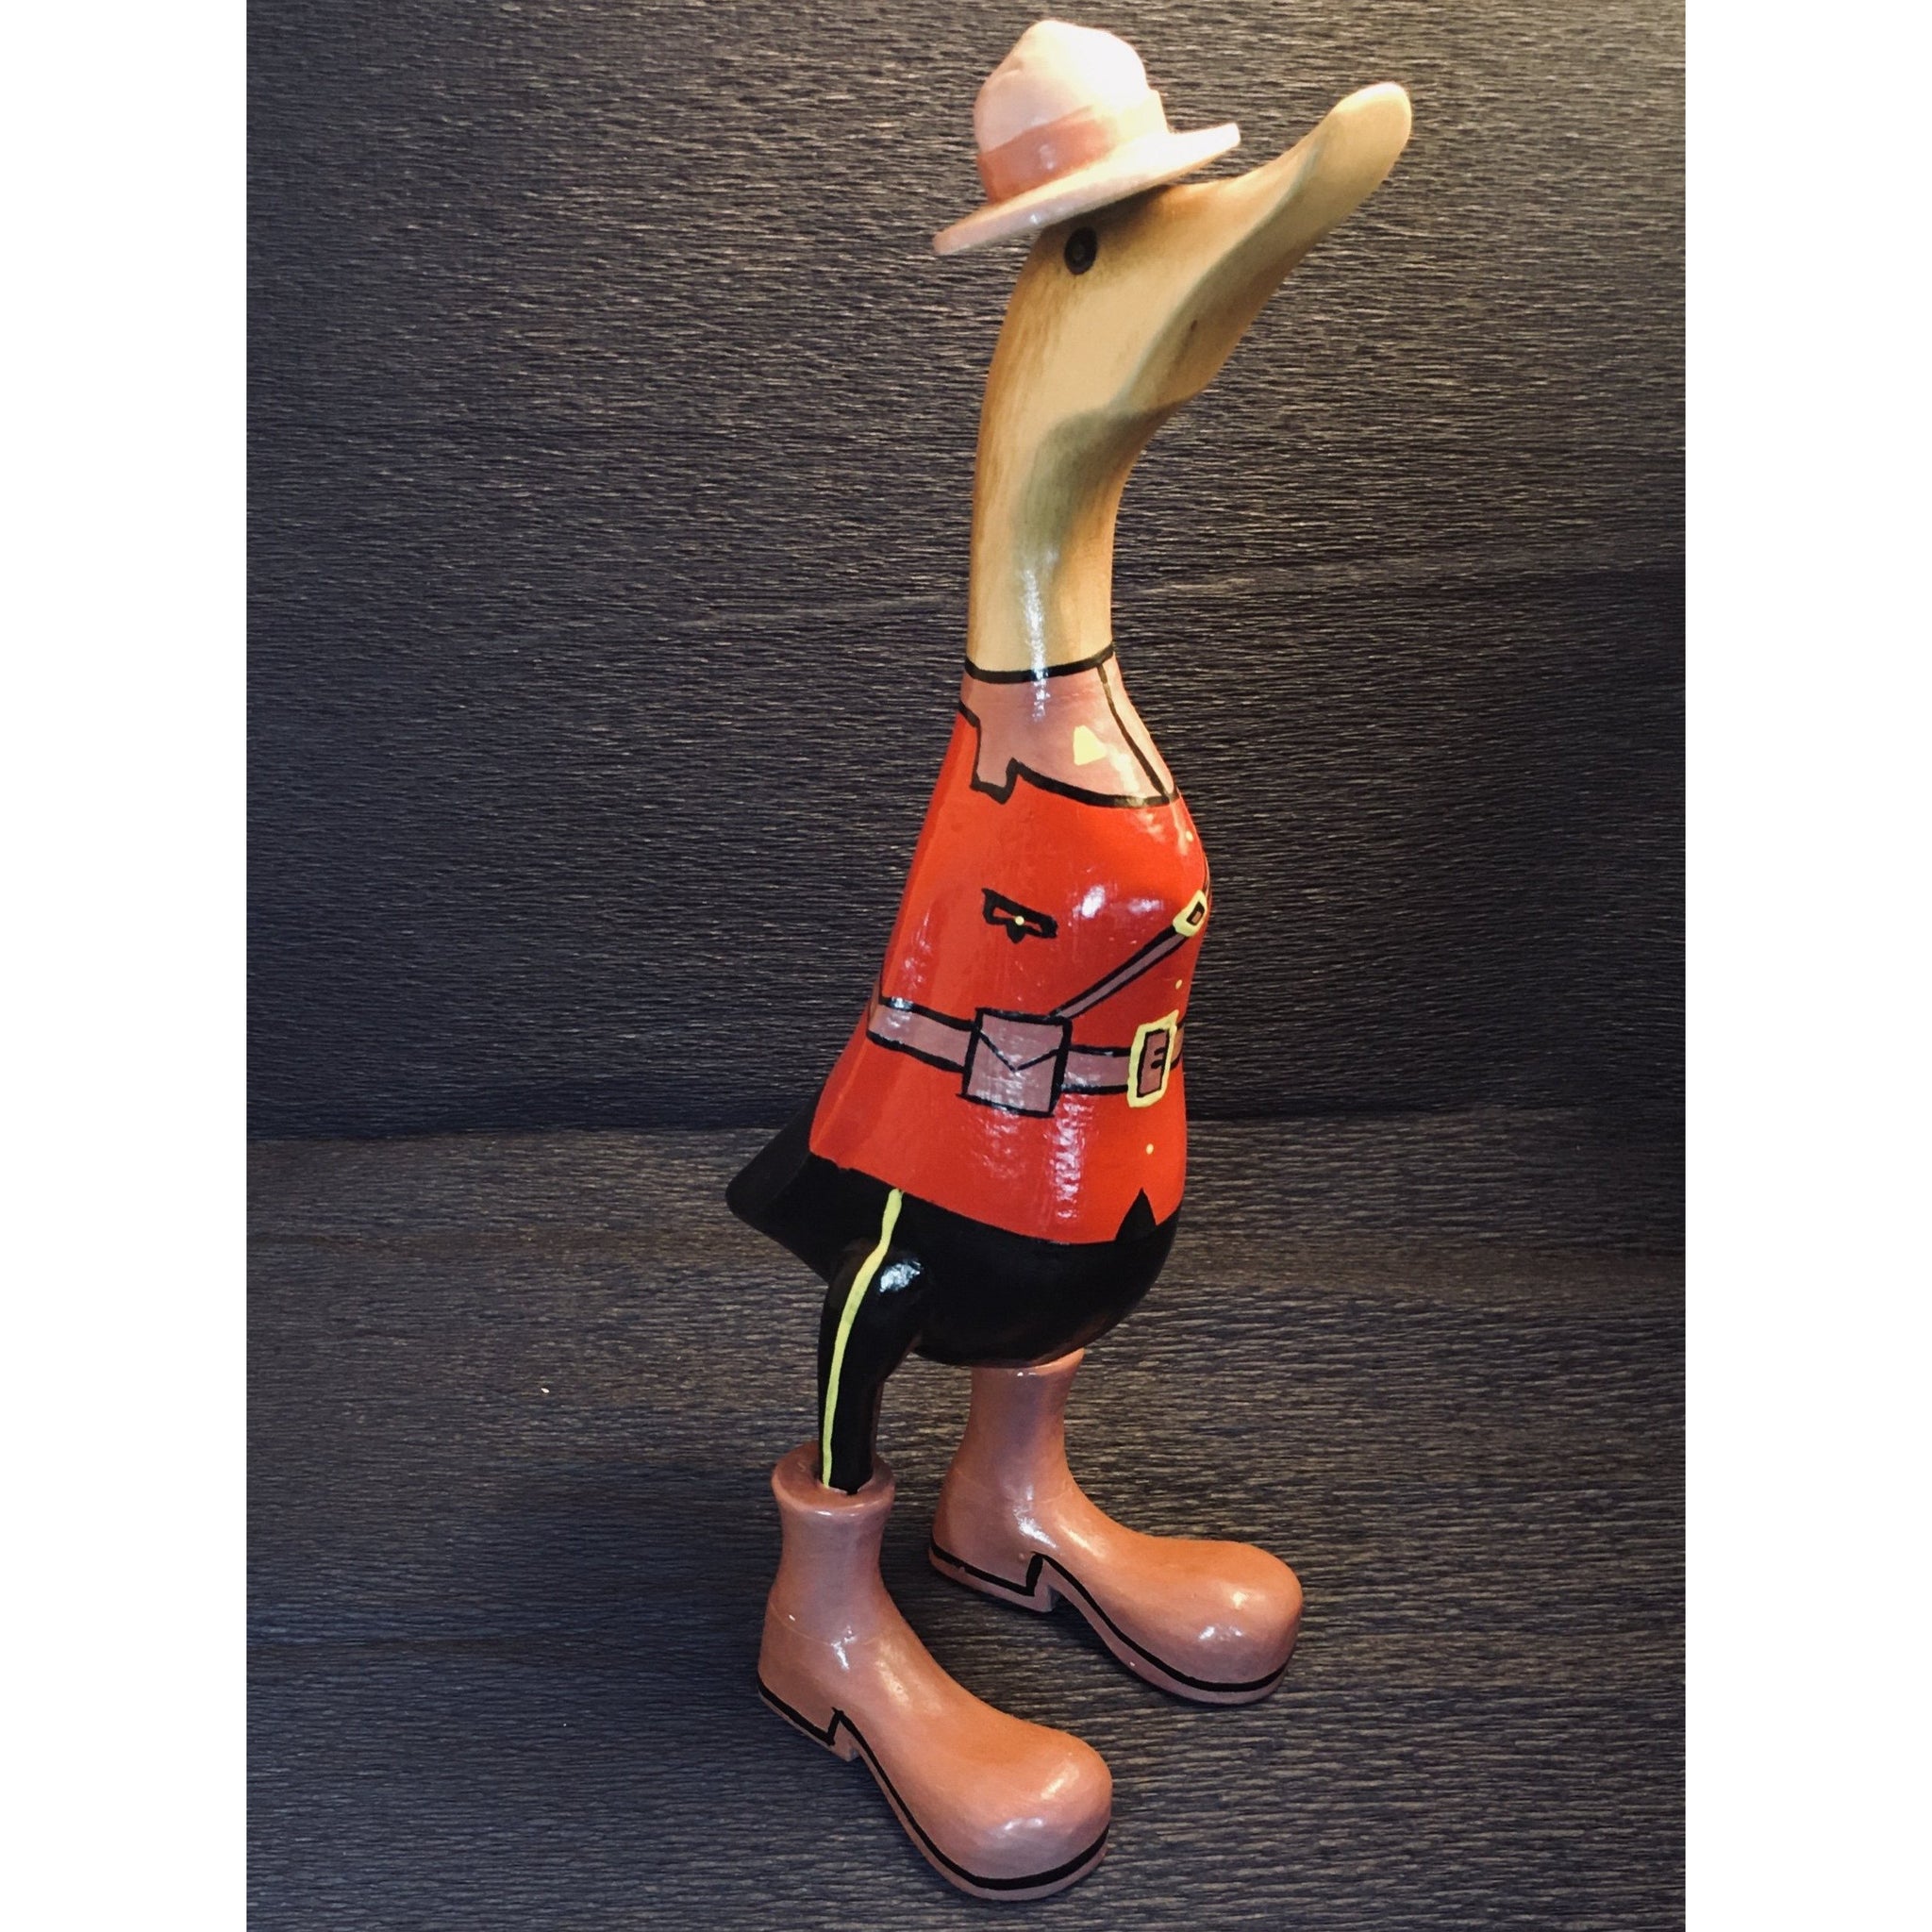 Hand carved wooden RCMP duck